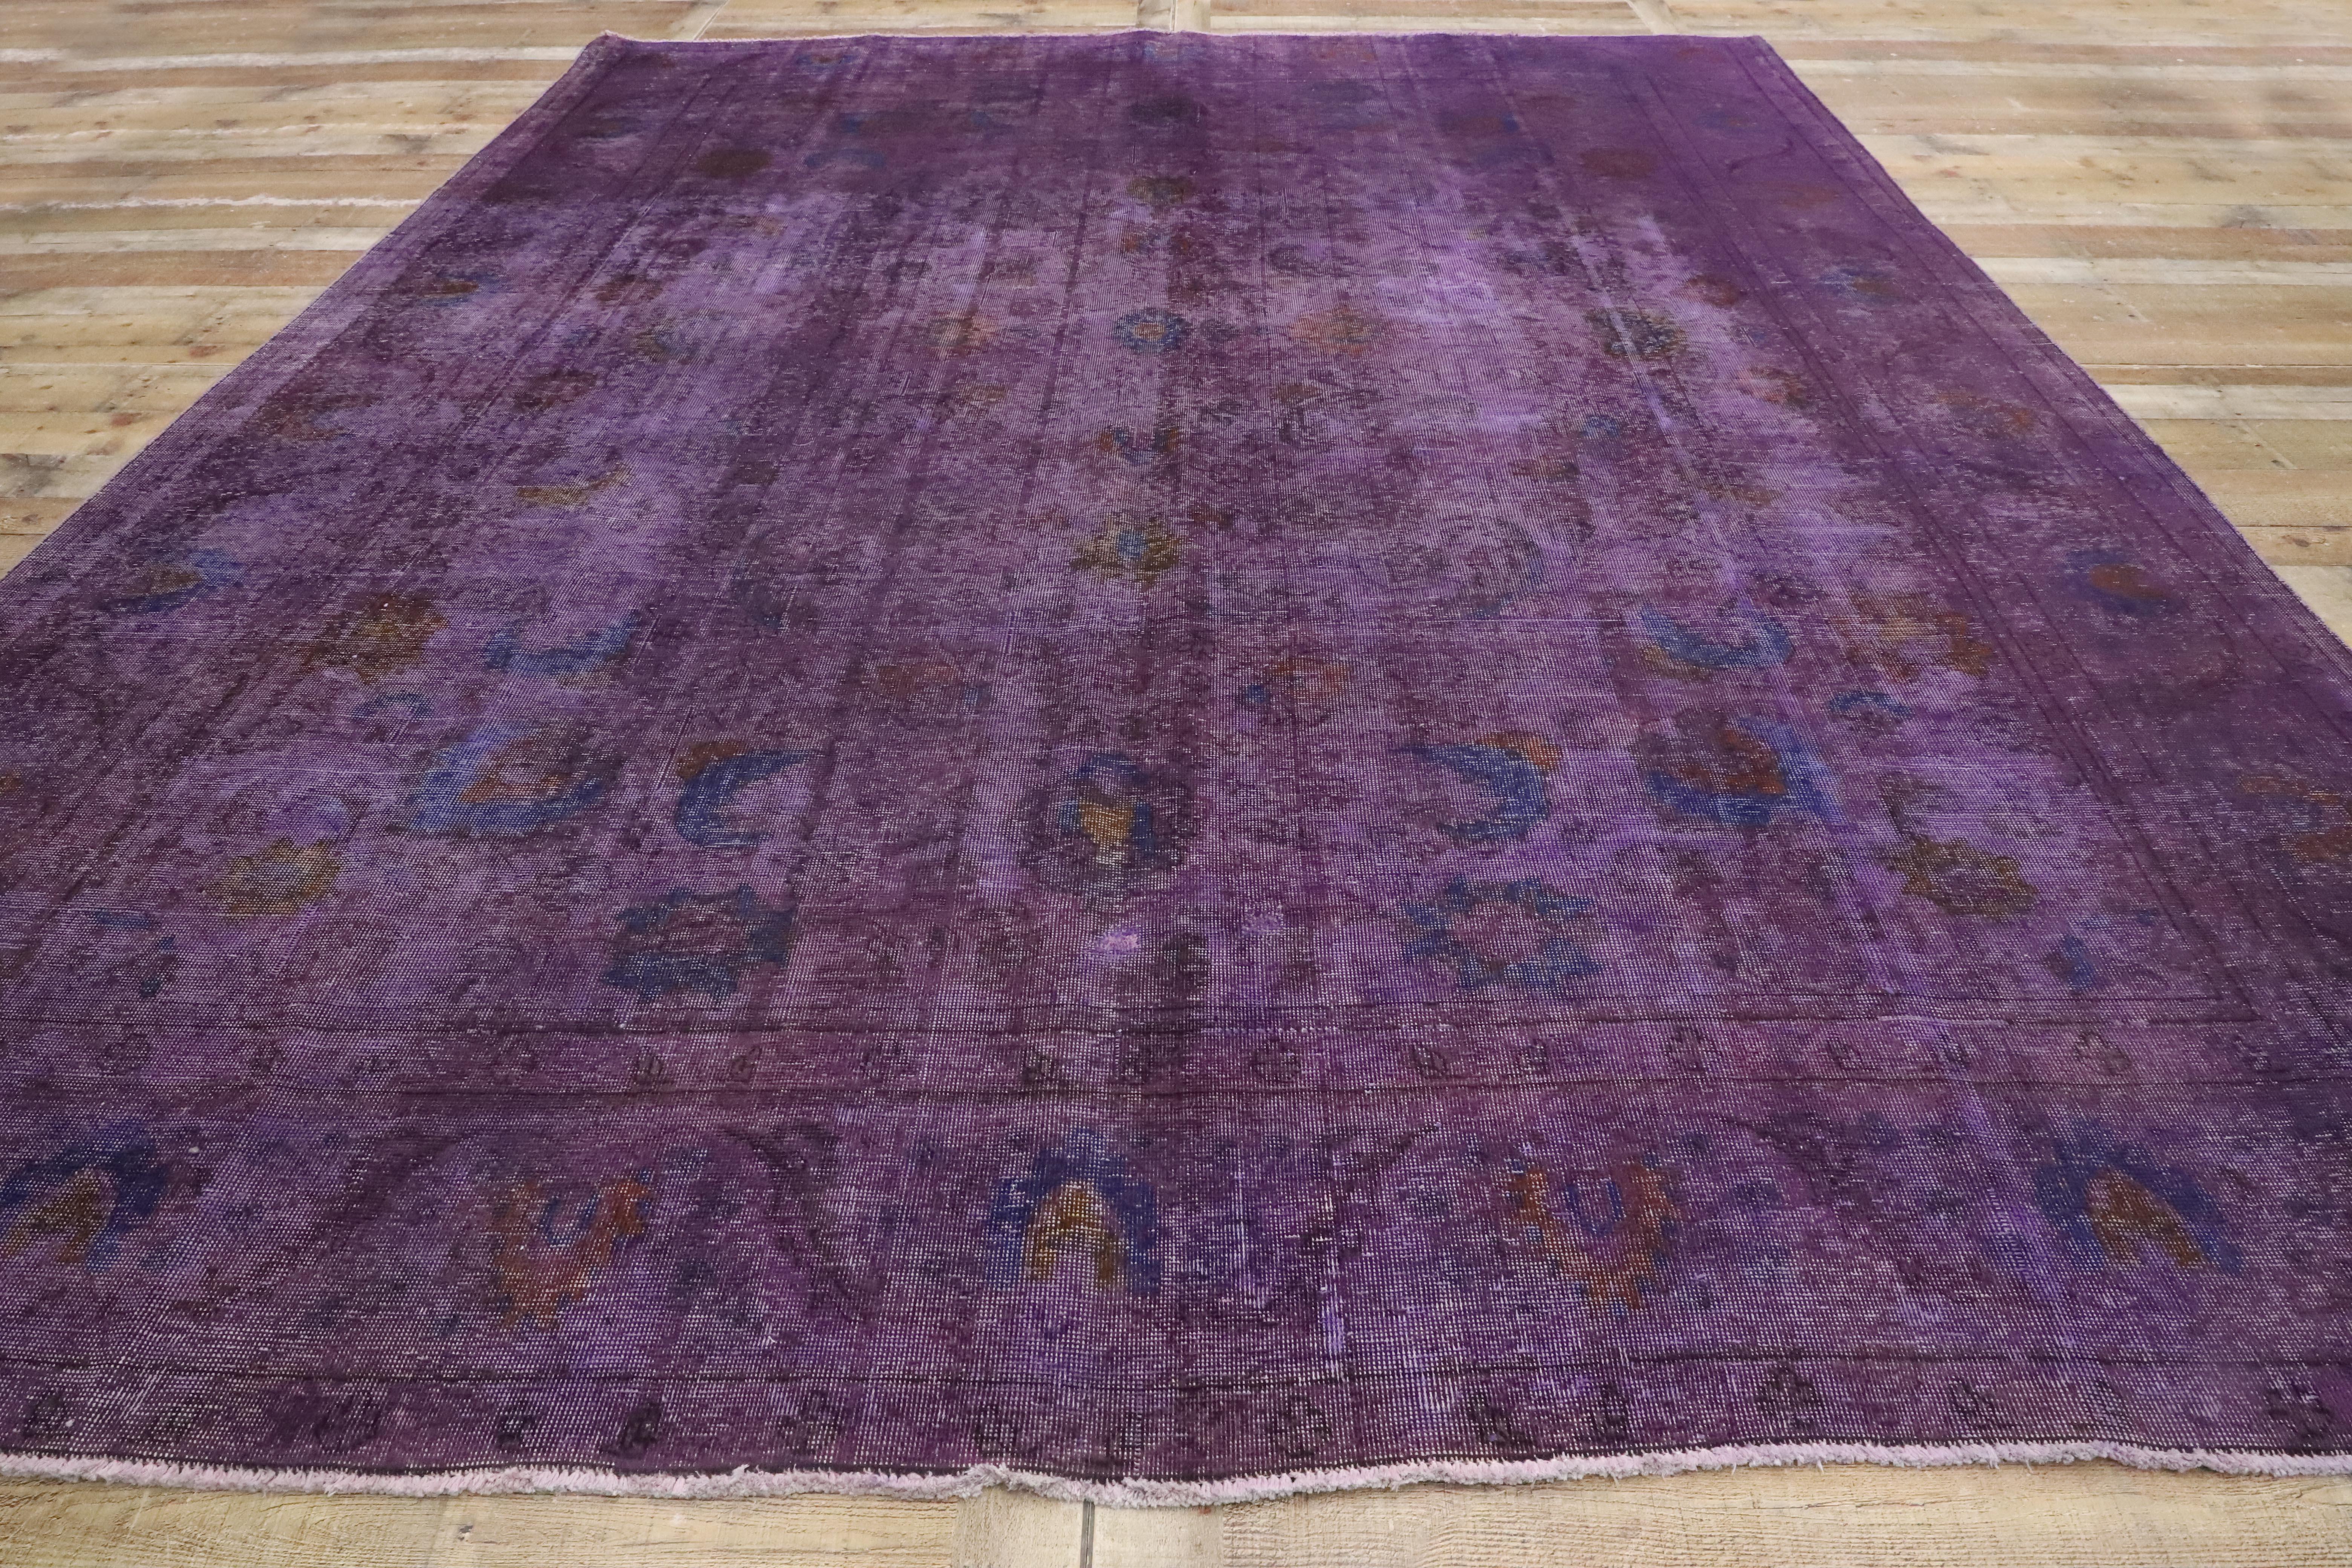 Distressed Overdyed Purple Persian Rug with PostModern Memphis Style 4